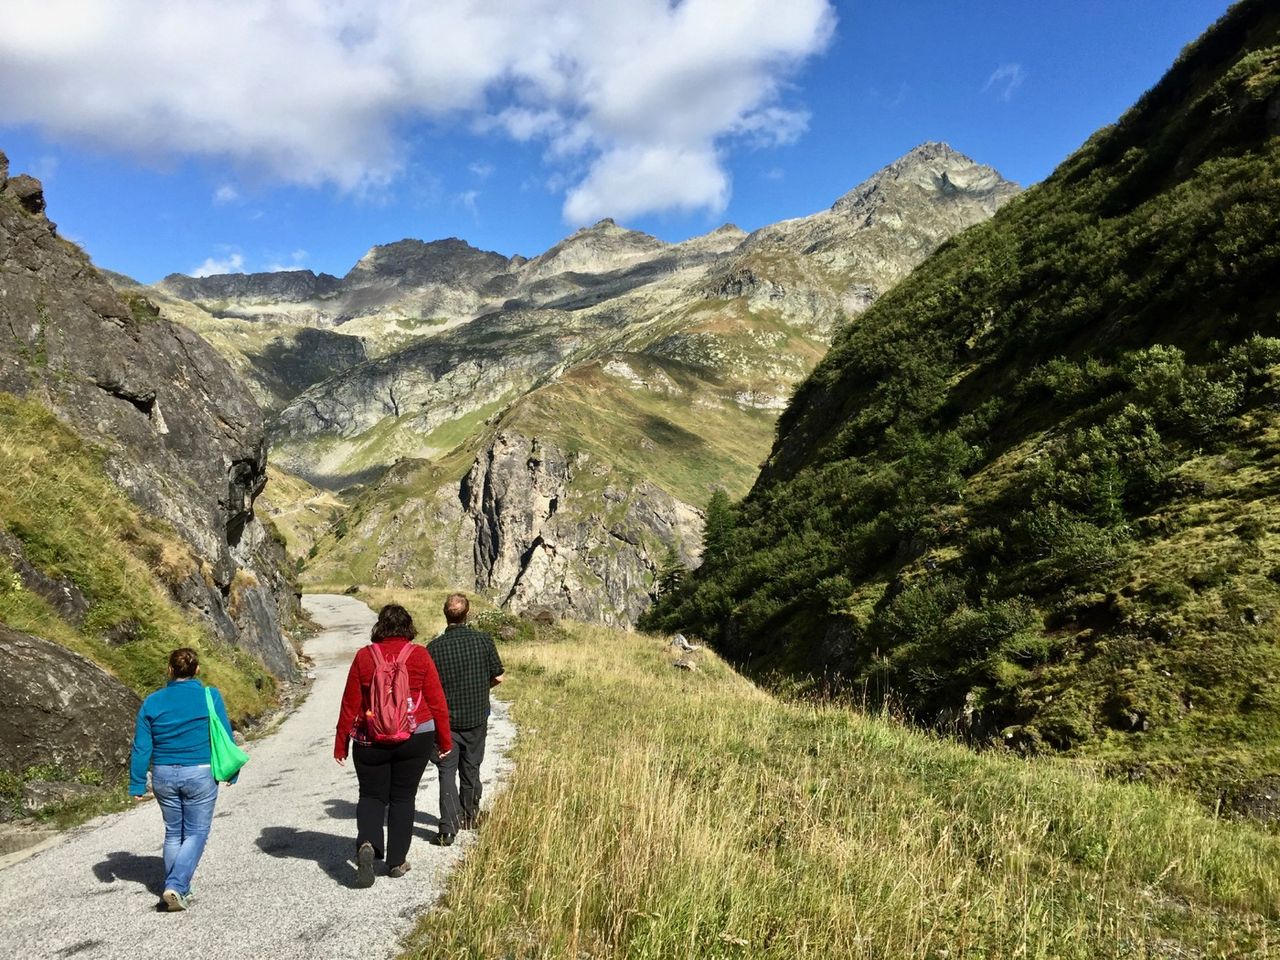 Three people walking along a path with mountains in the background.